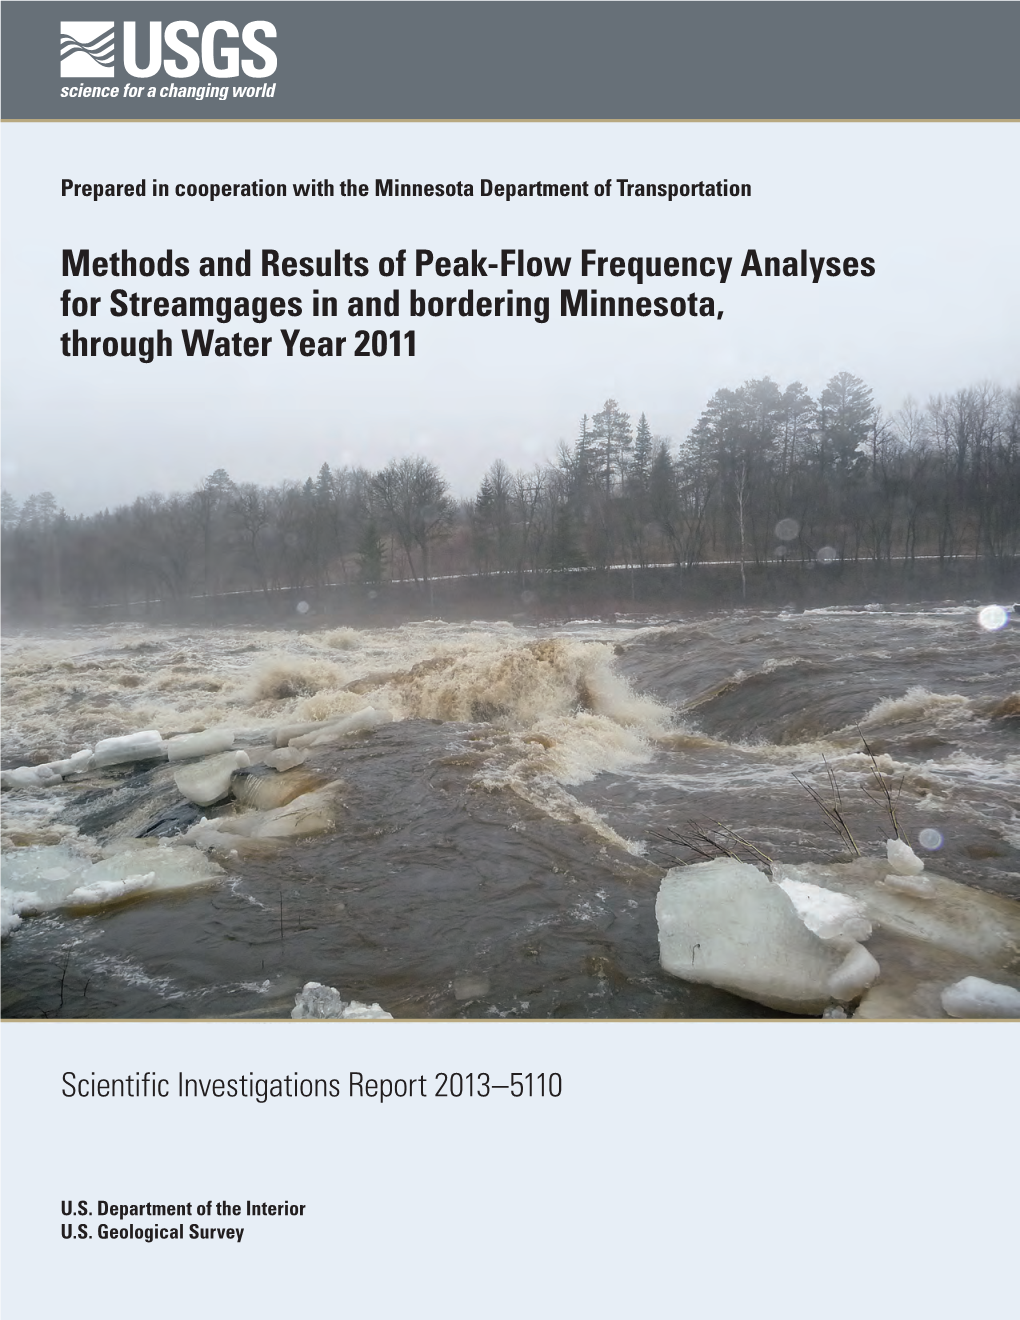 Methods and Results of Peak-Flow Frequency Analyses for Streamgages in and Bordering Minnesota, Through Water Year 2011